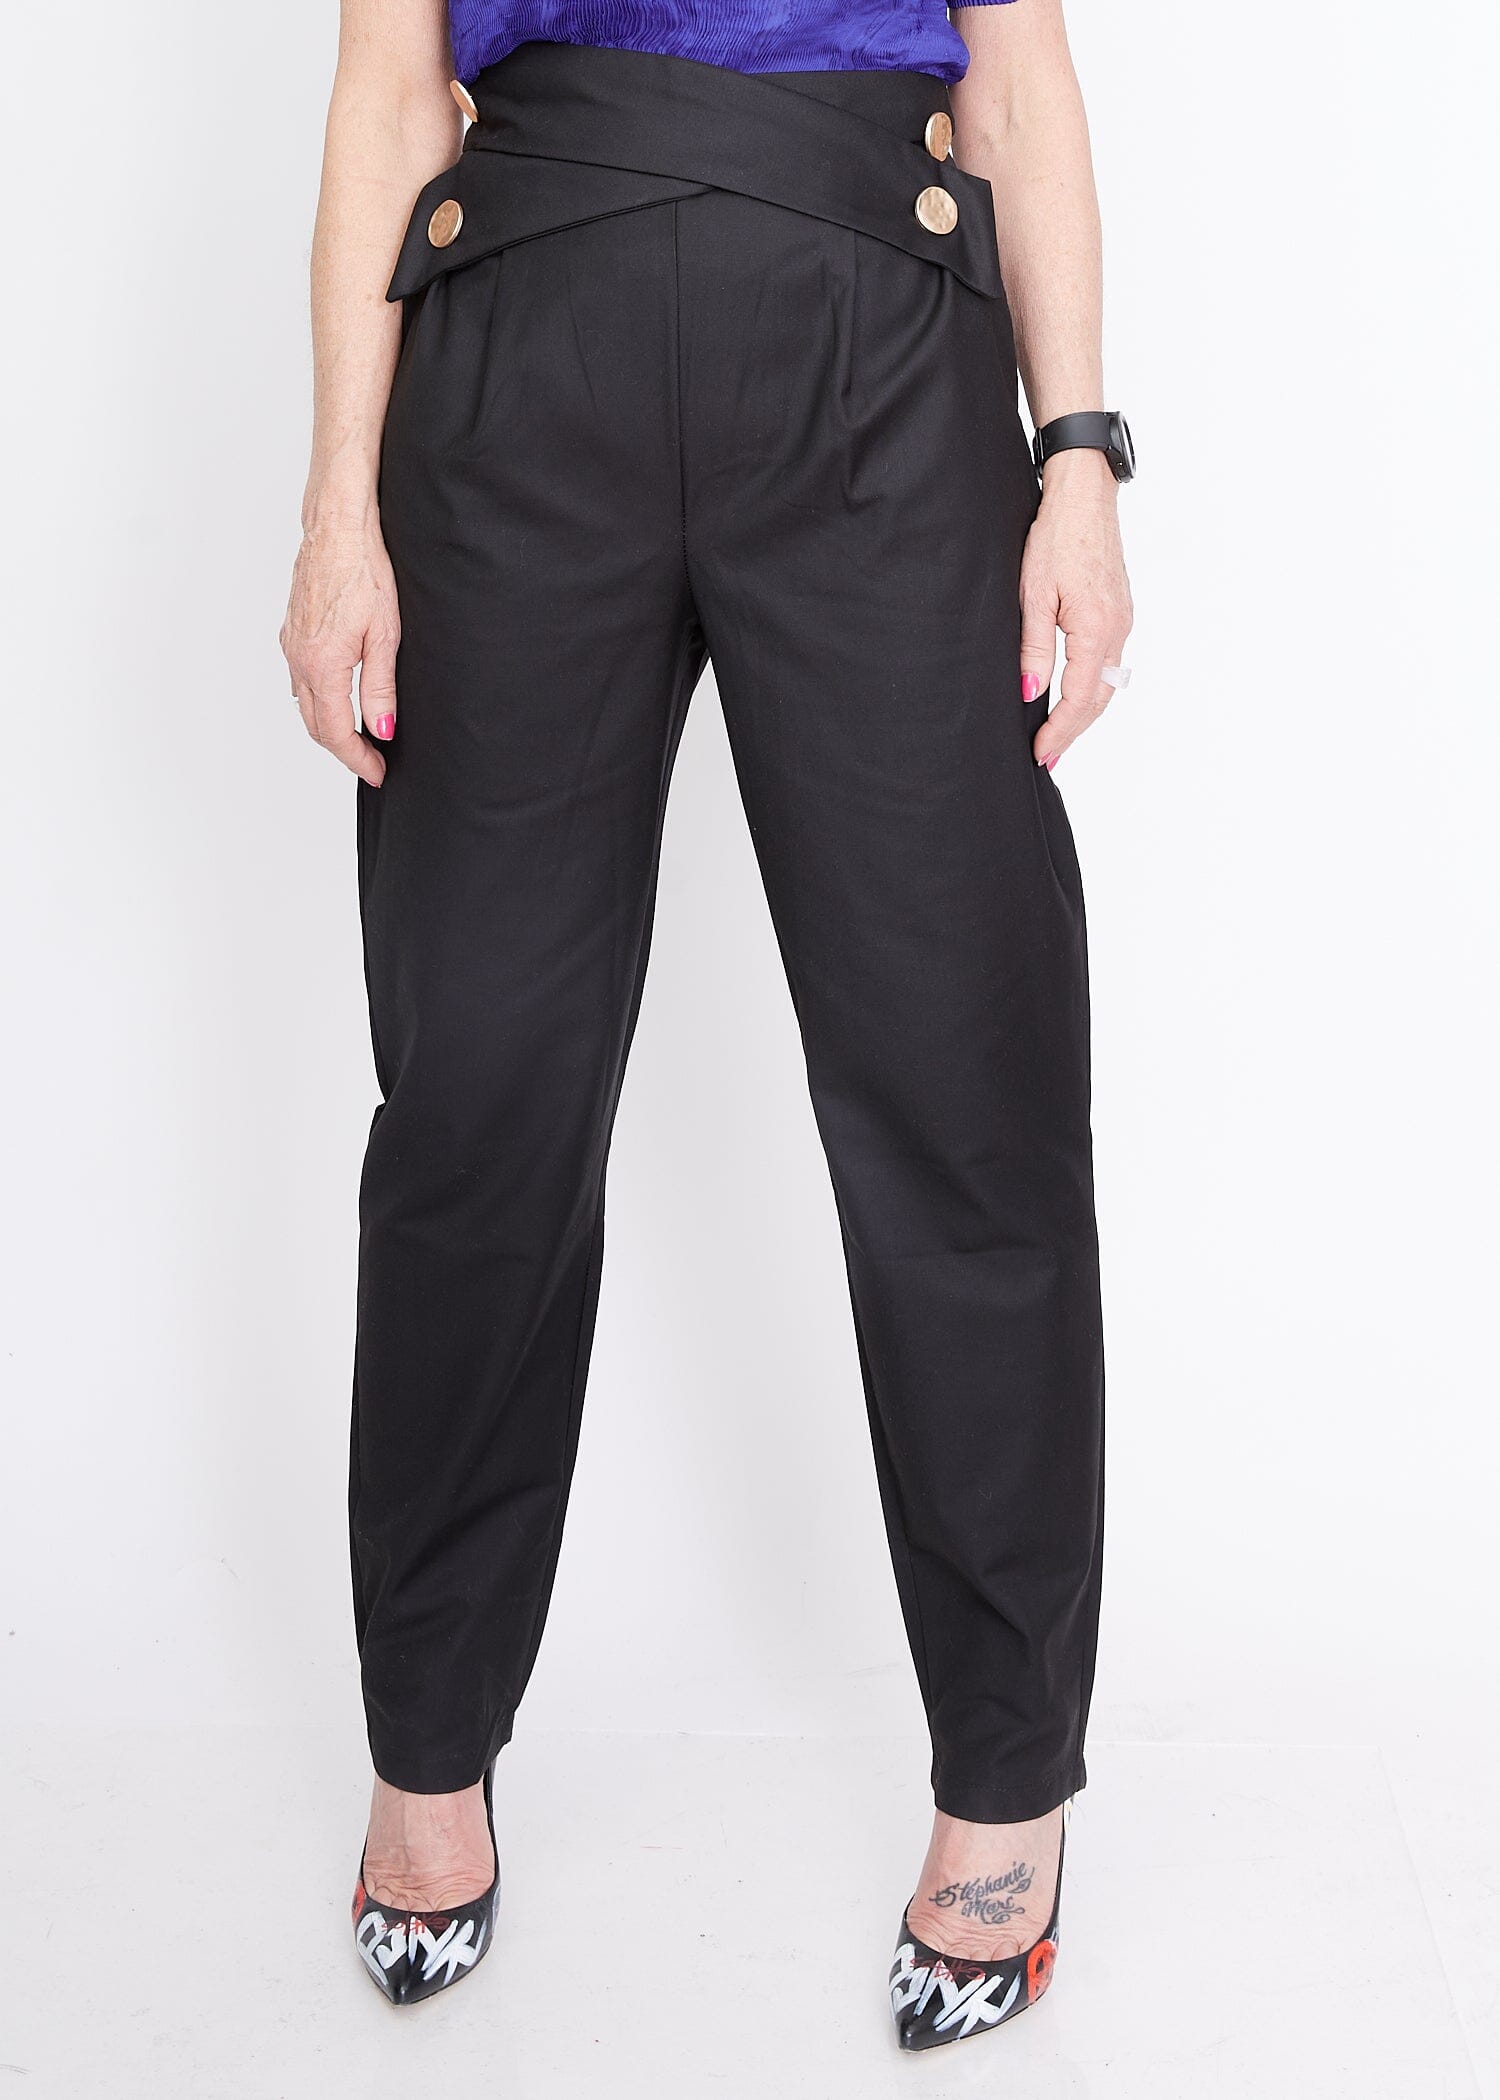 Cross Front Trousers Pants Kate Hewko Black S 